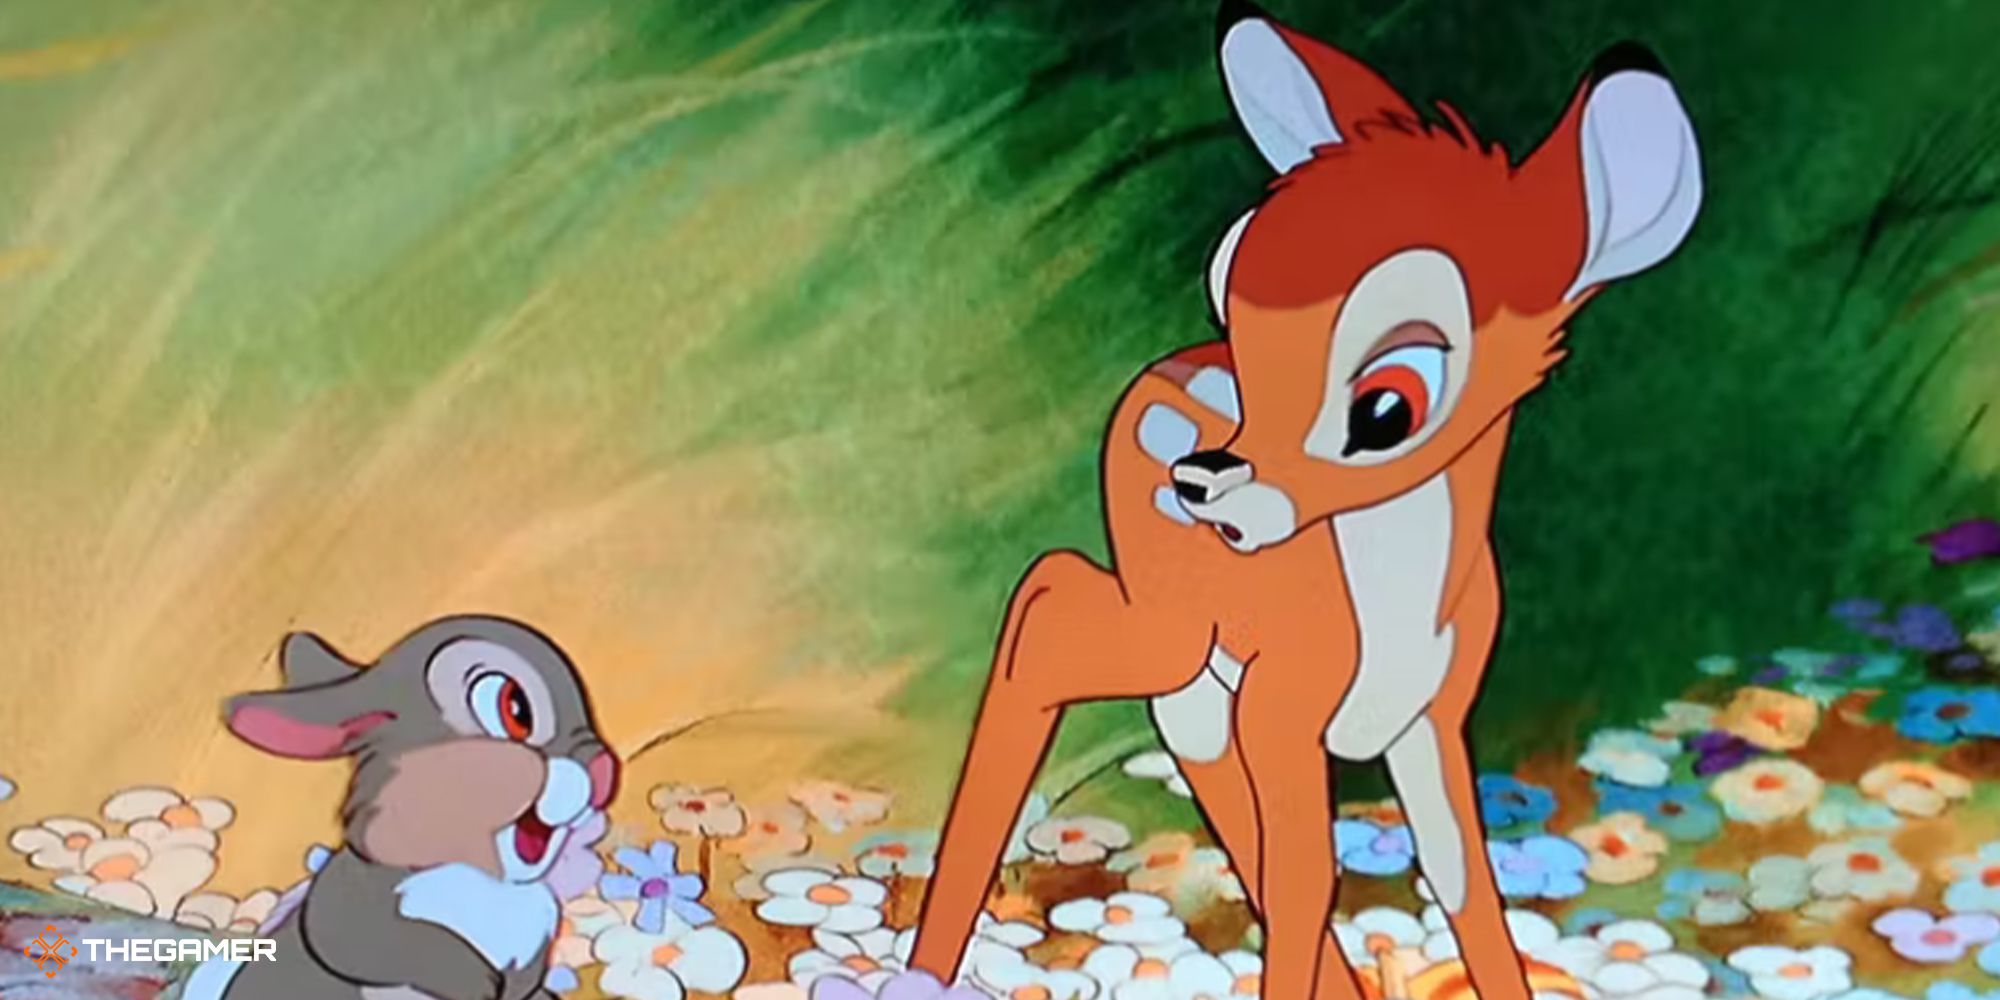 Bambi Thumper and Bambi in the flowers Disney